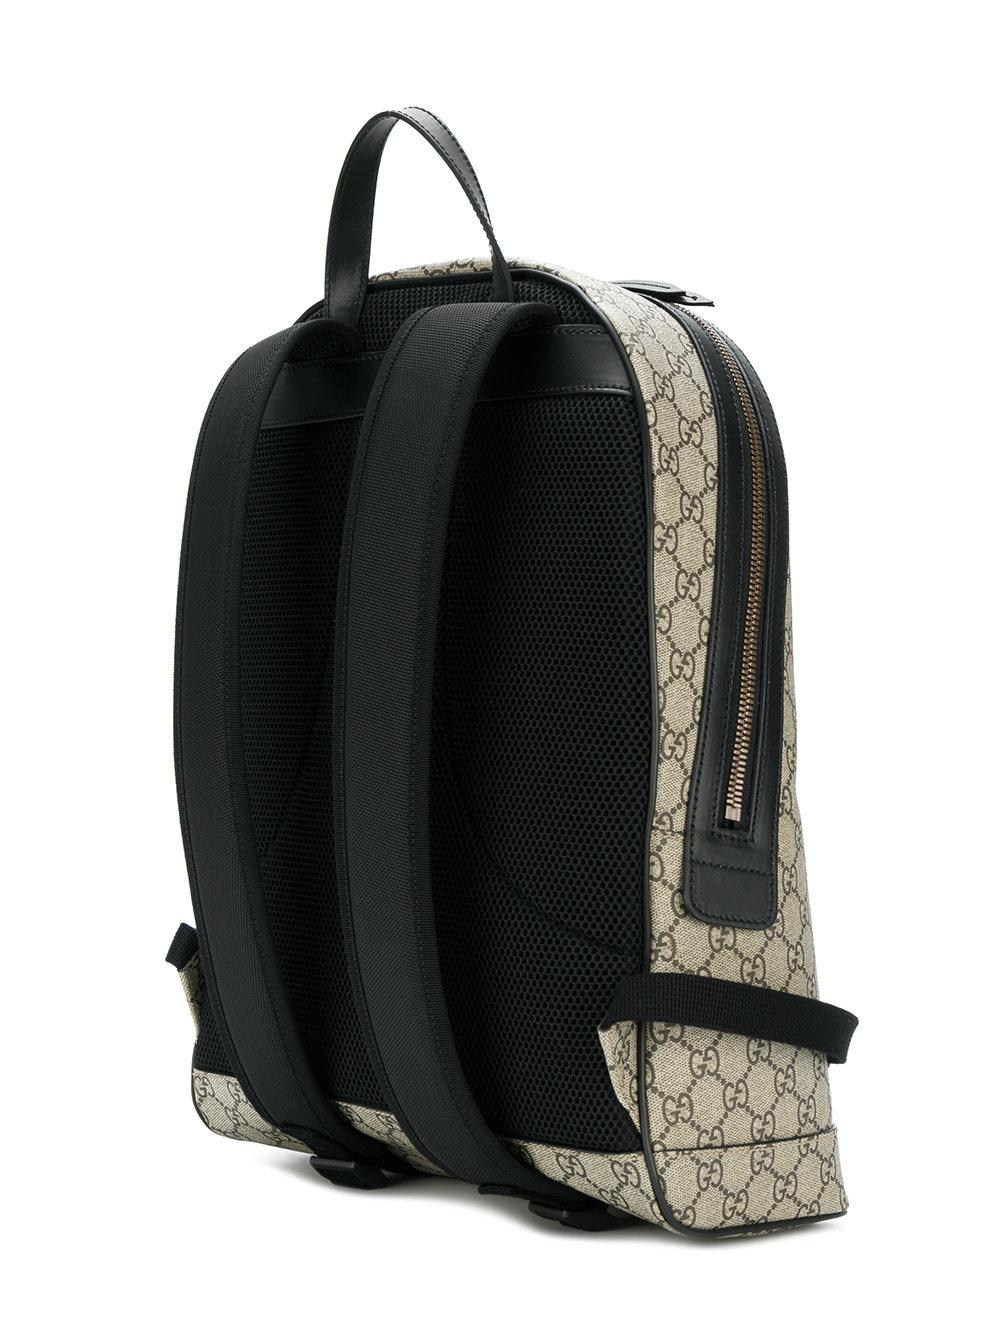 Gucci Bee Print Gg Supreme Backpack for Men - Lyst